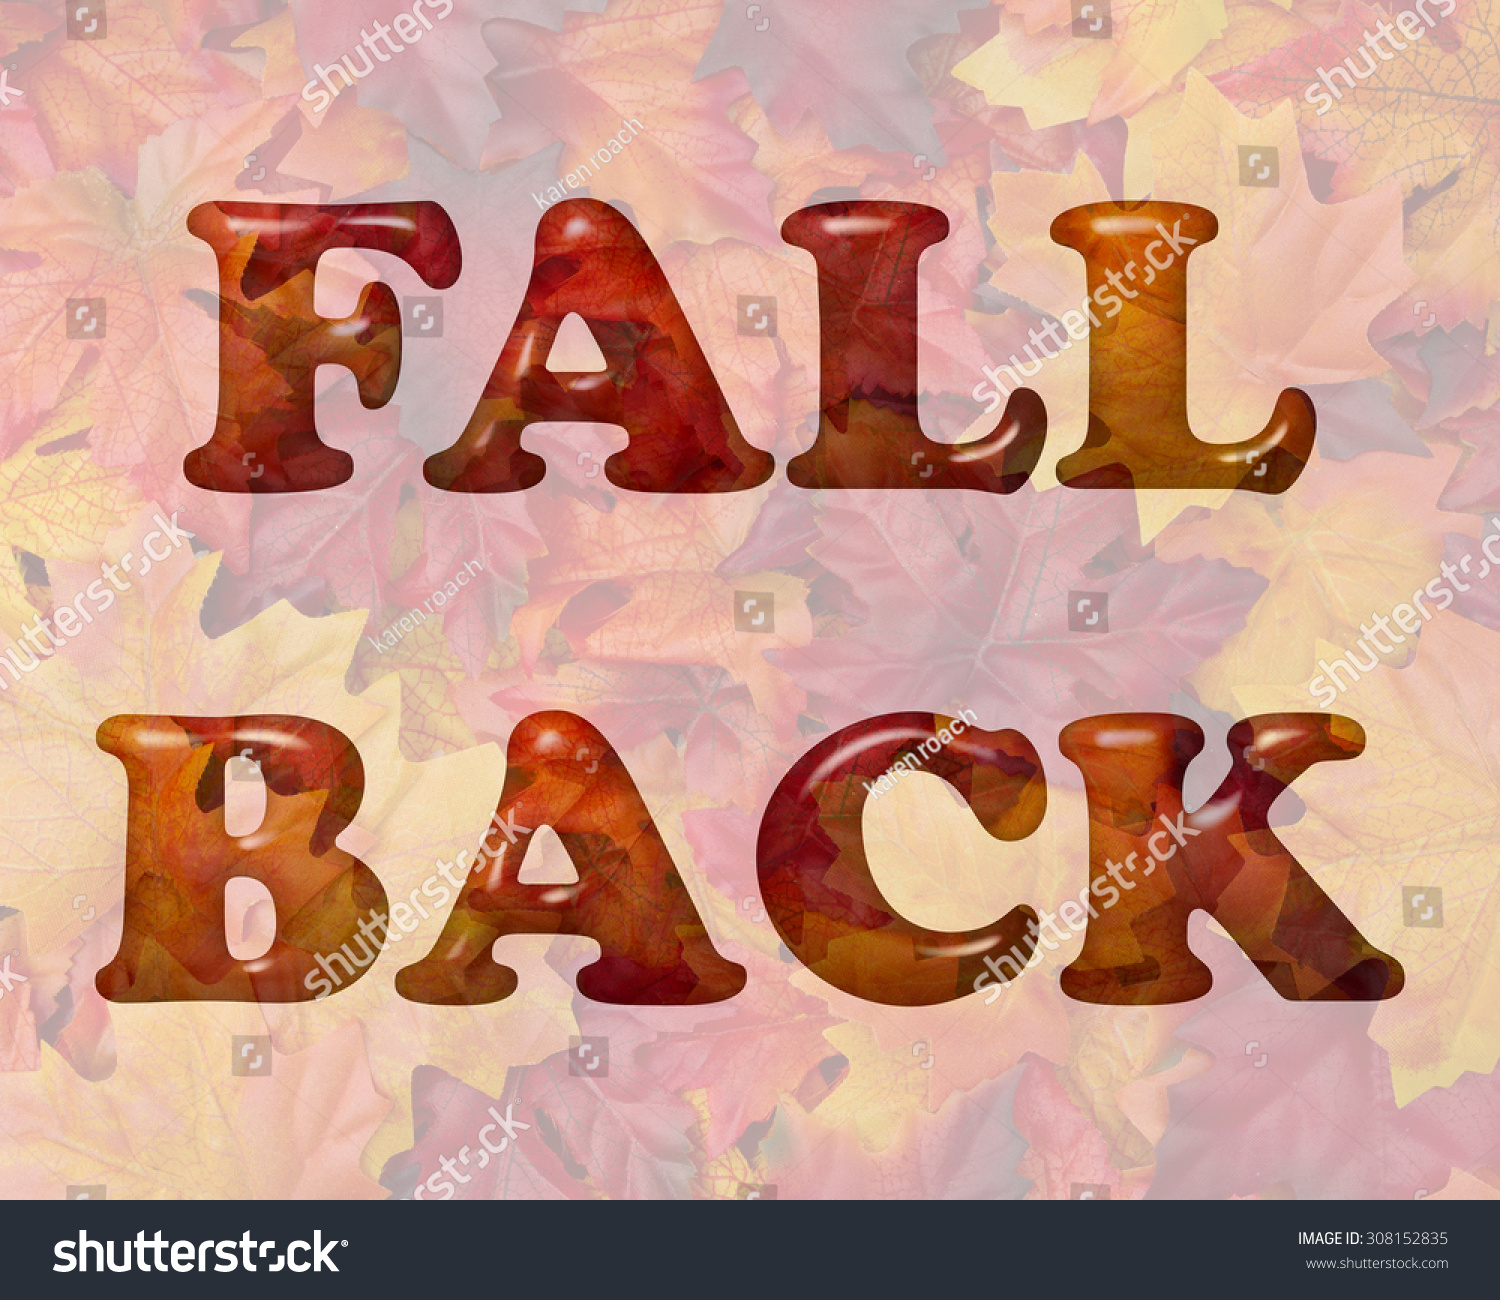 Fall Back Time Change Words Fall Stock Illustration 308152835